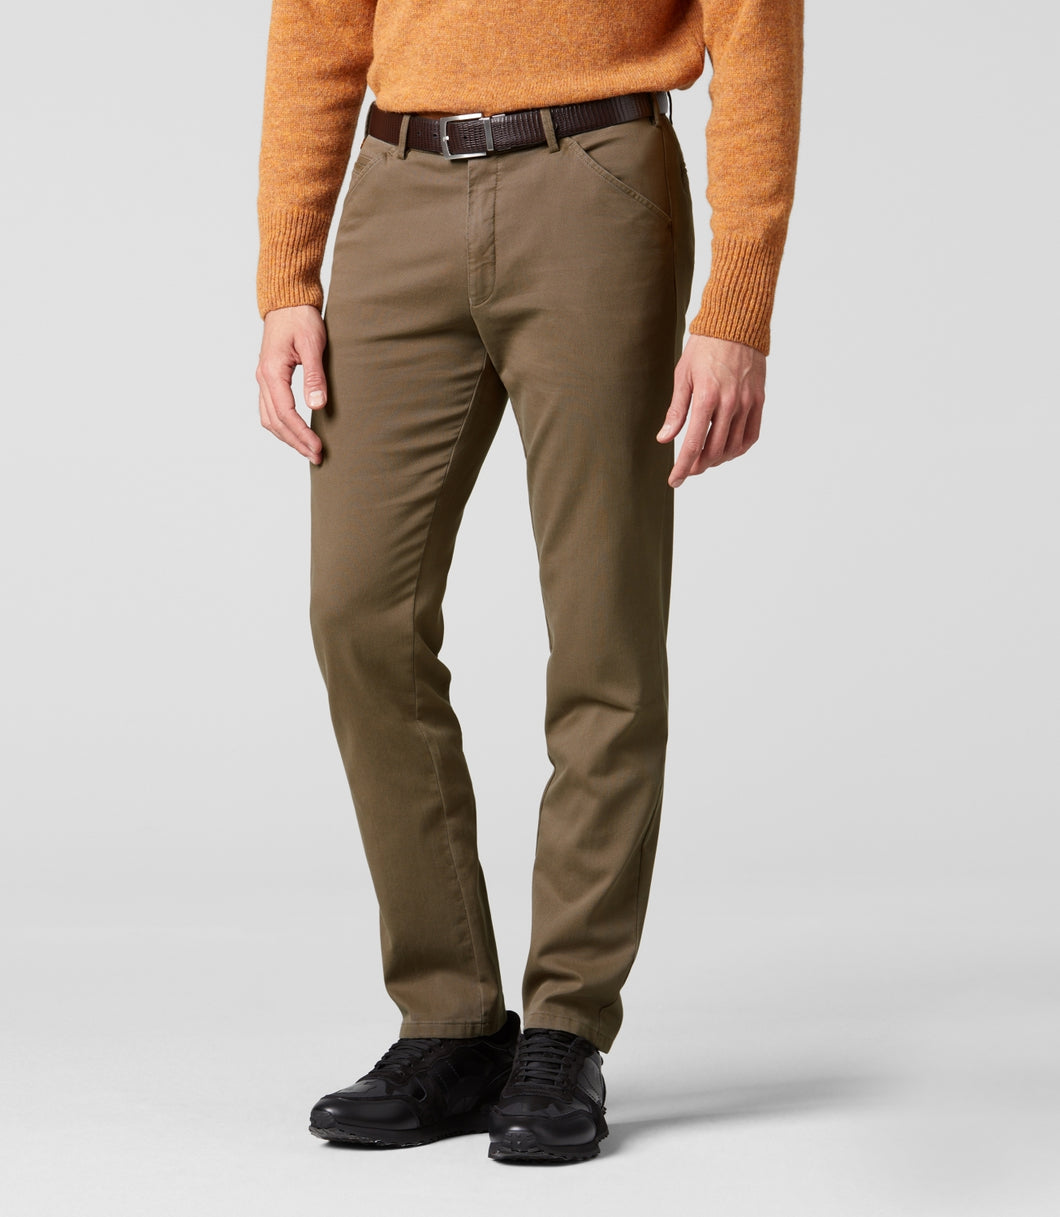 30% OFF - MEYER Trousers - Chicago 5580 Super Stretch Chinos - Stone - Size: 38 SHORT